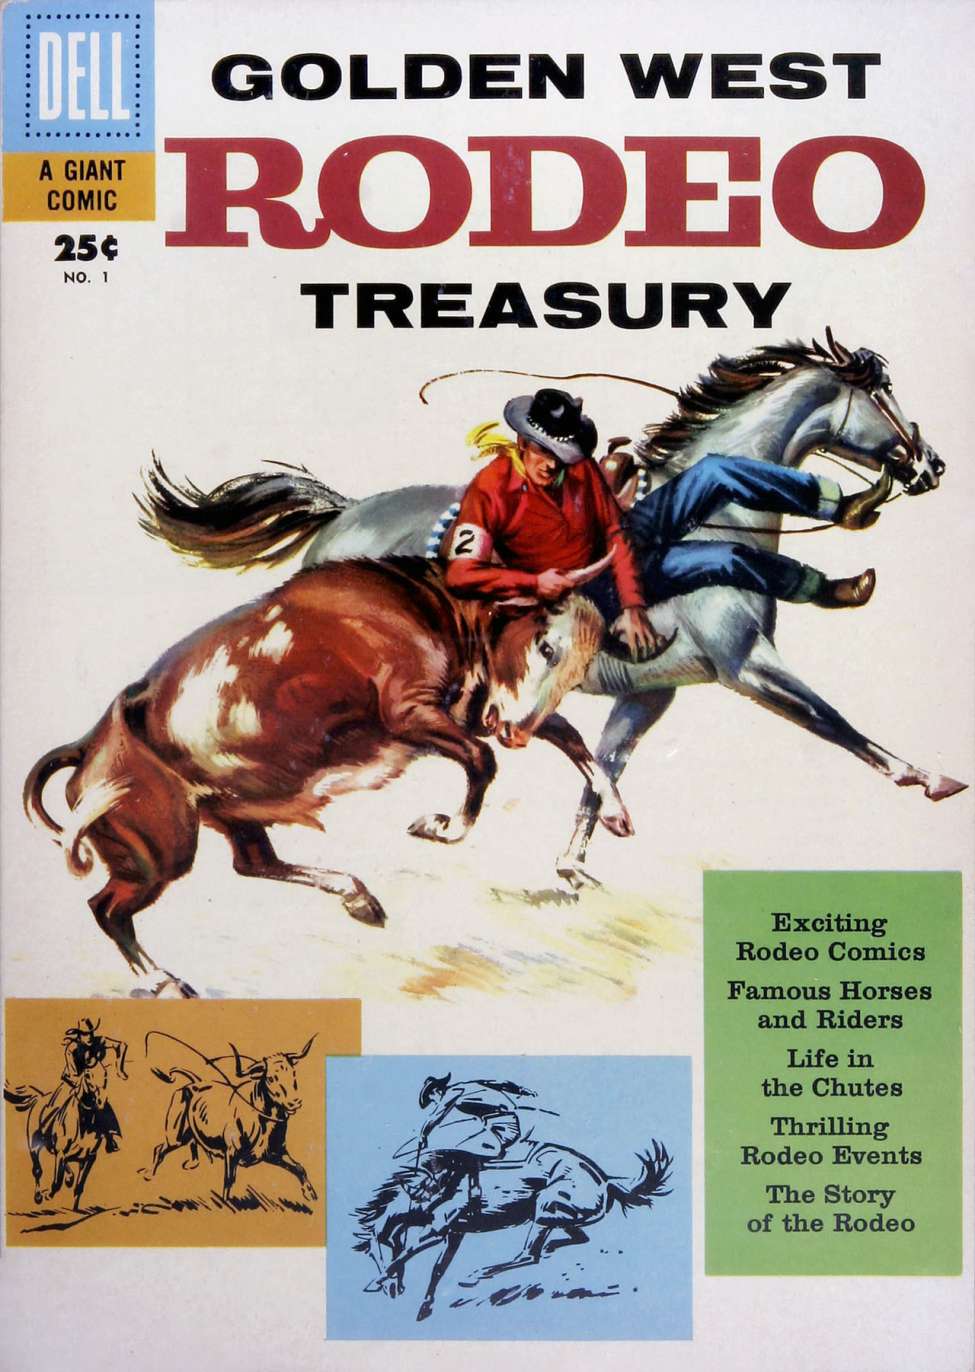 Comic Book Cover For Golden West Rodeo Treasury 1